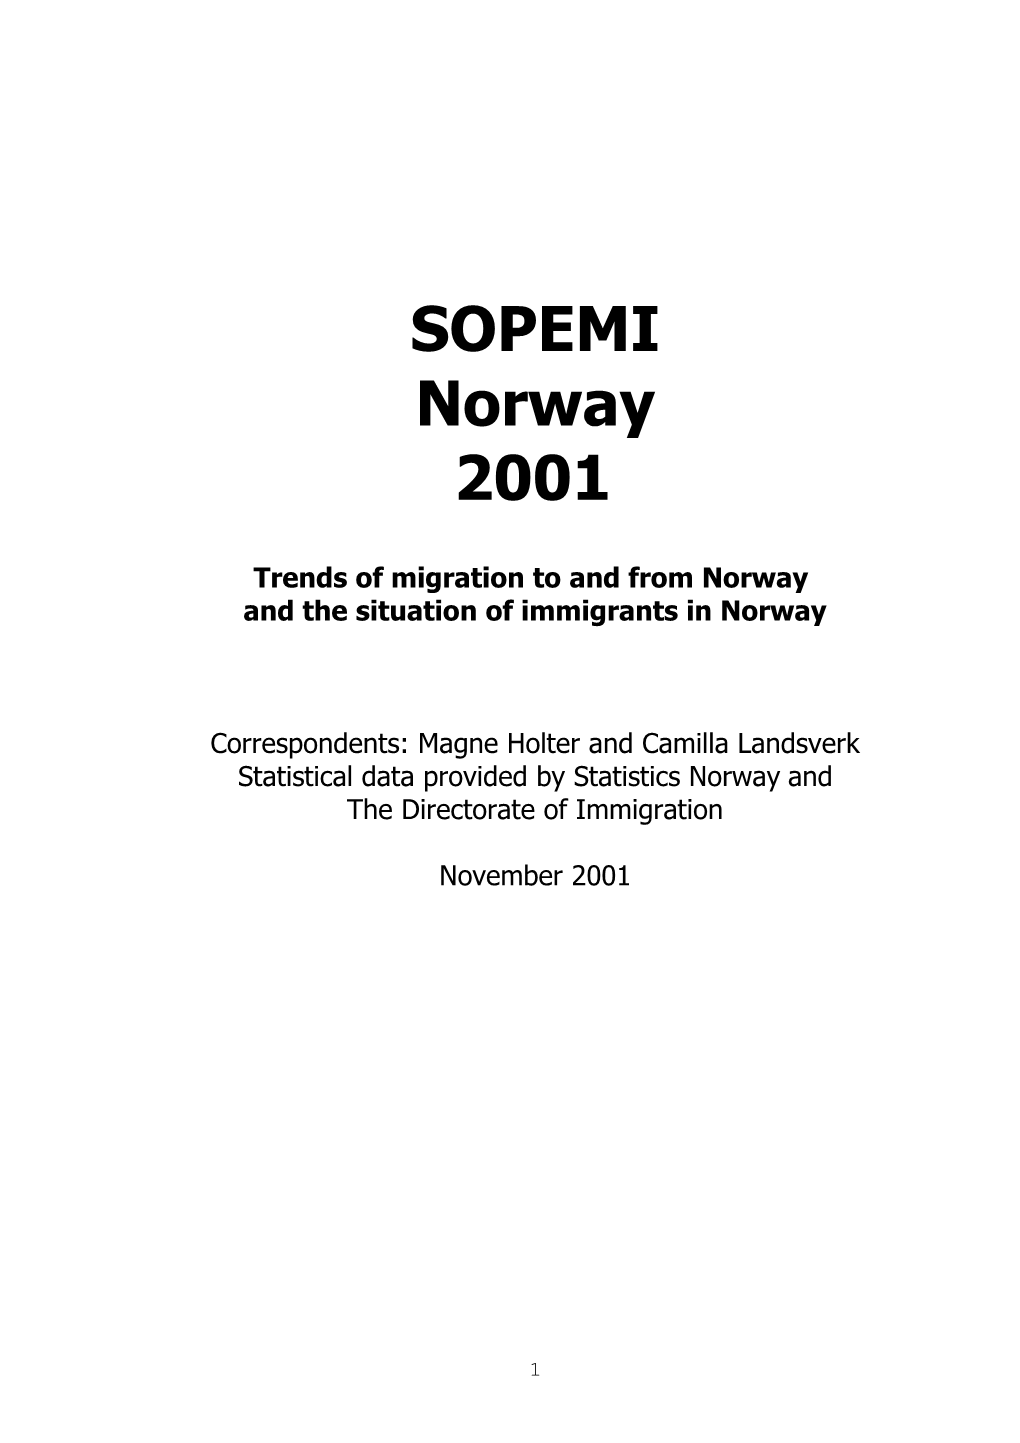 Trends of Migration to and from Norway